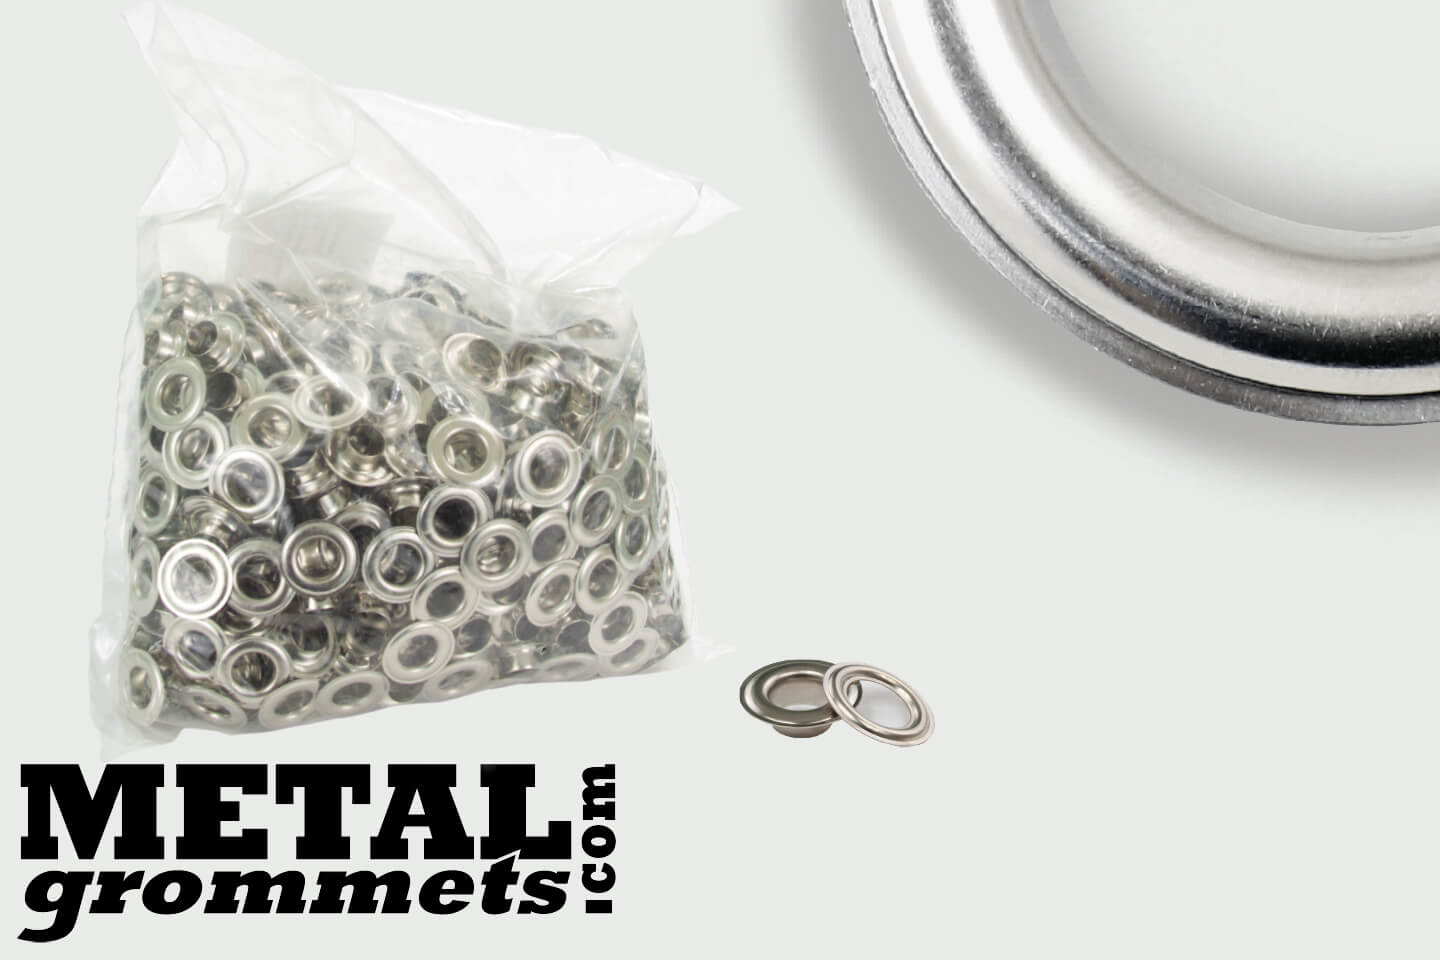 #1 (5/16 - 0.3125 Hole Size) Nickel grommets & washers non-rusti